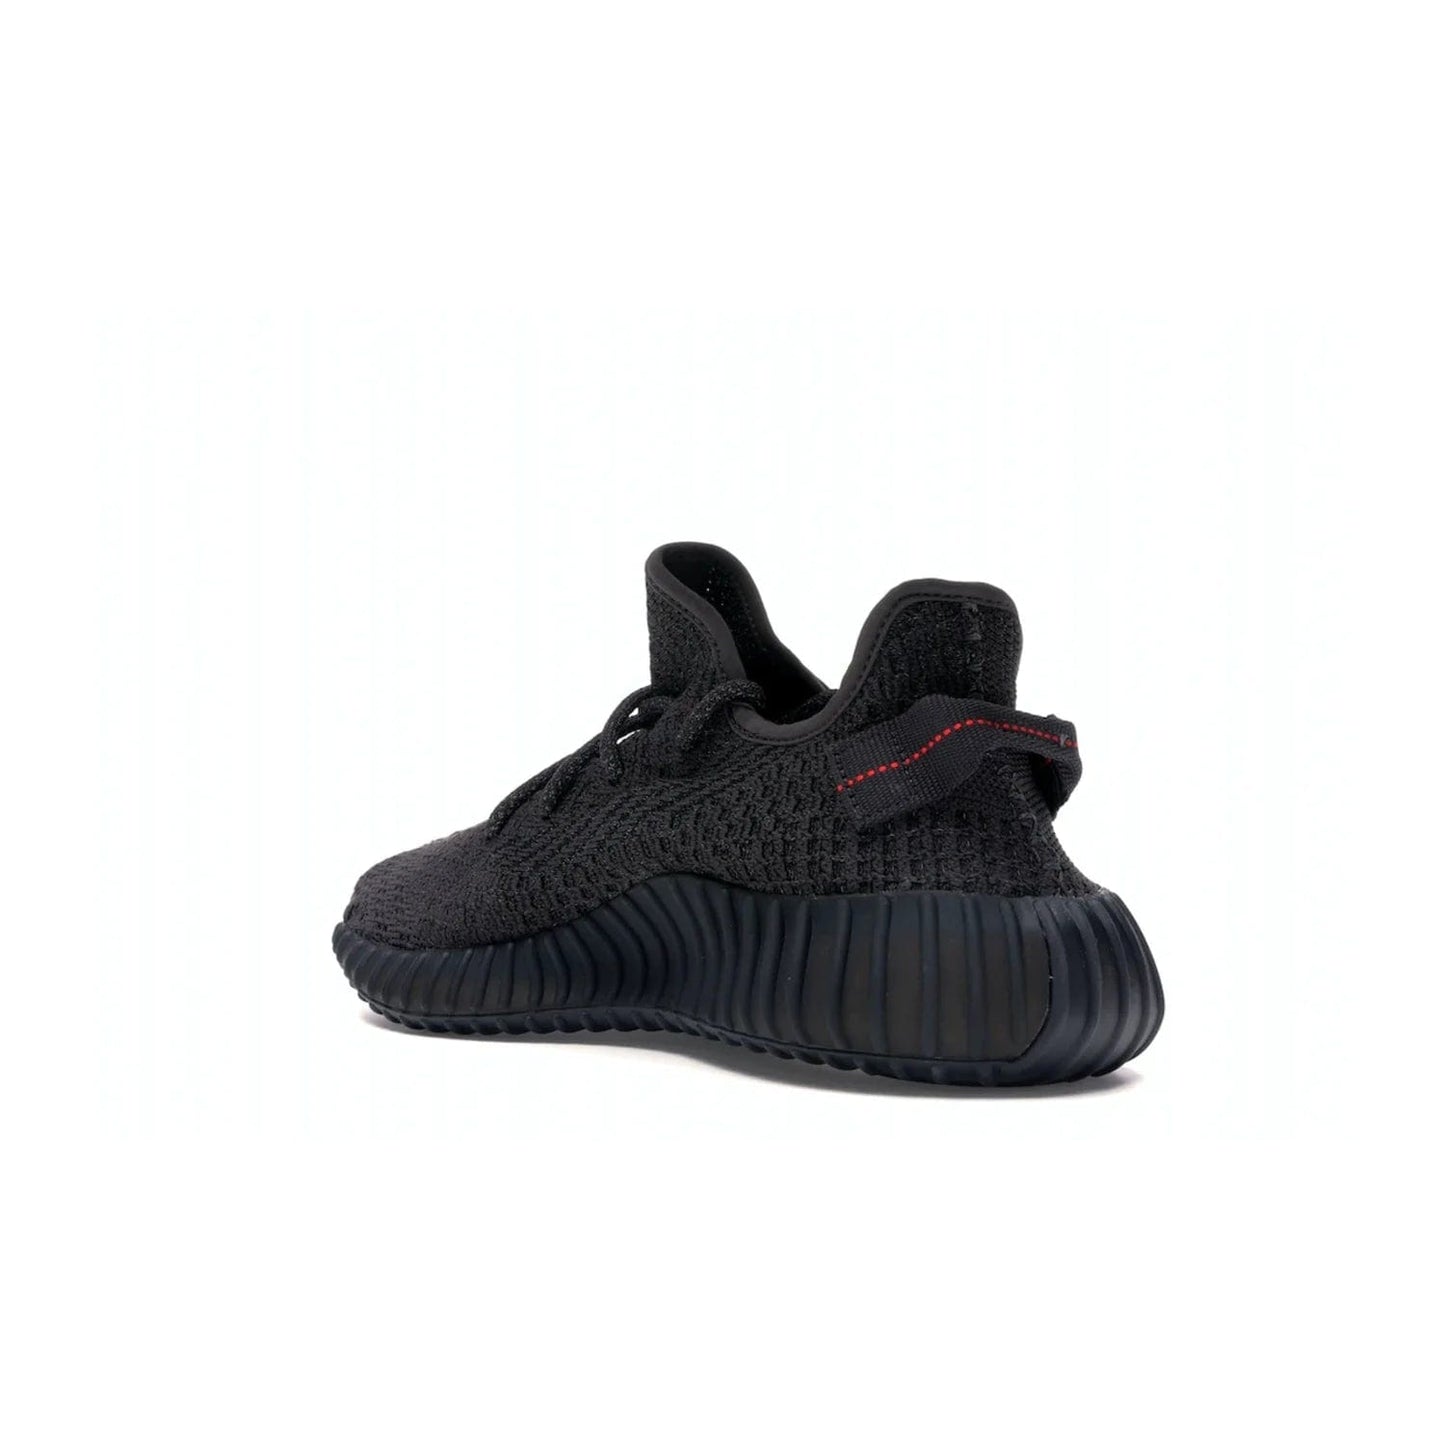 adidas Yeezy Boost 350 V2 Static Black (Reflective) - Image 24 - Only at www.BallersClubKickz.com - Make a statement with the adidas Yeezy Boost 350 V2 Static Black Reflective. All-black upper, reflective accents, midsole, and sole combine for a stylish look. High quality materials. June 2019 release. Add to your collection today.